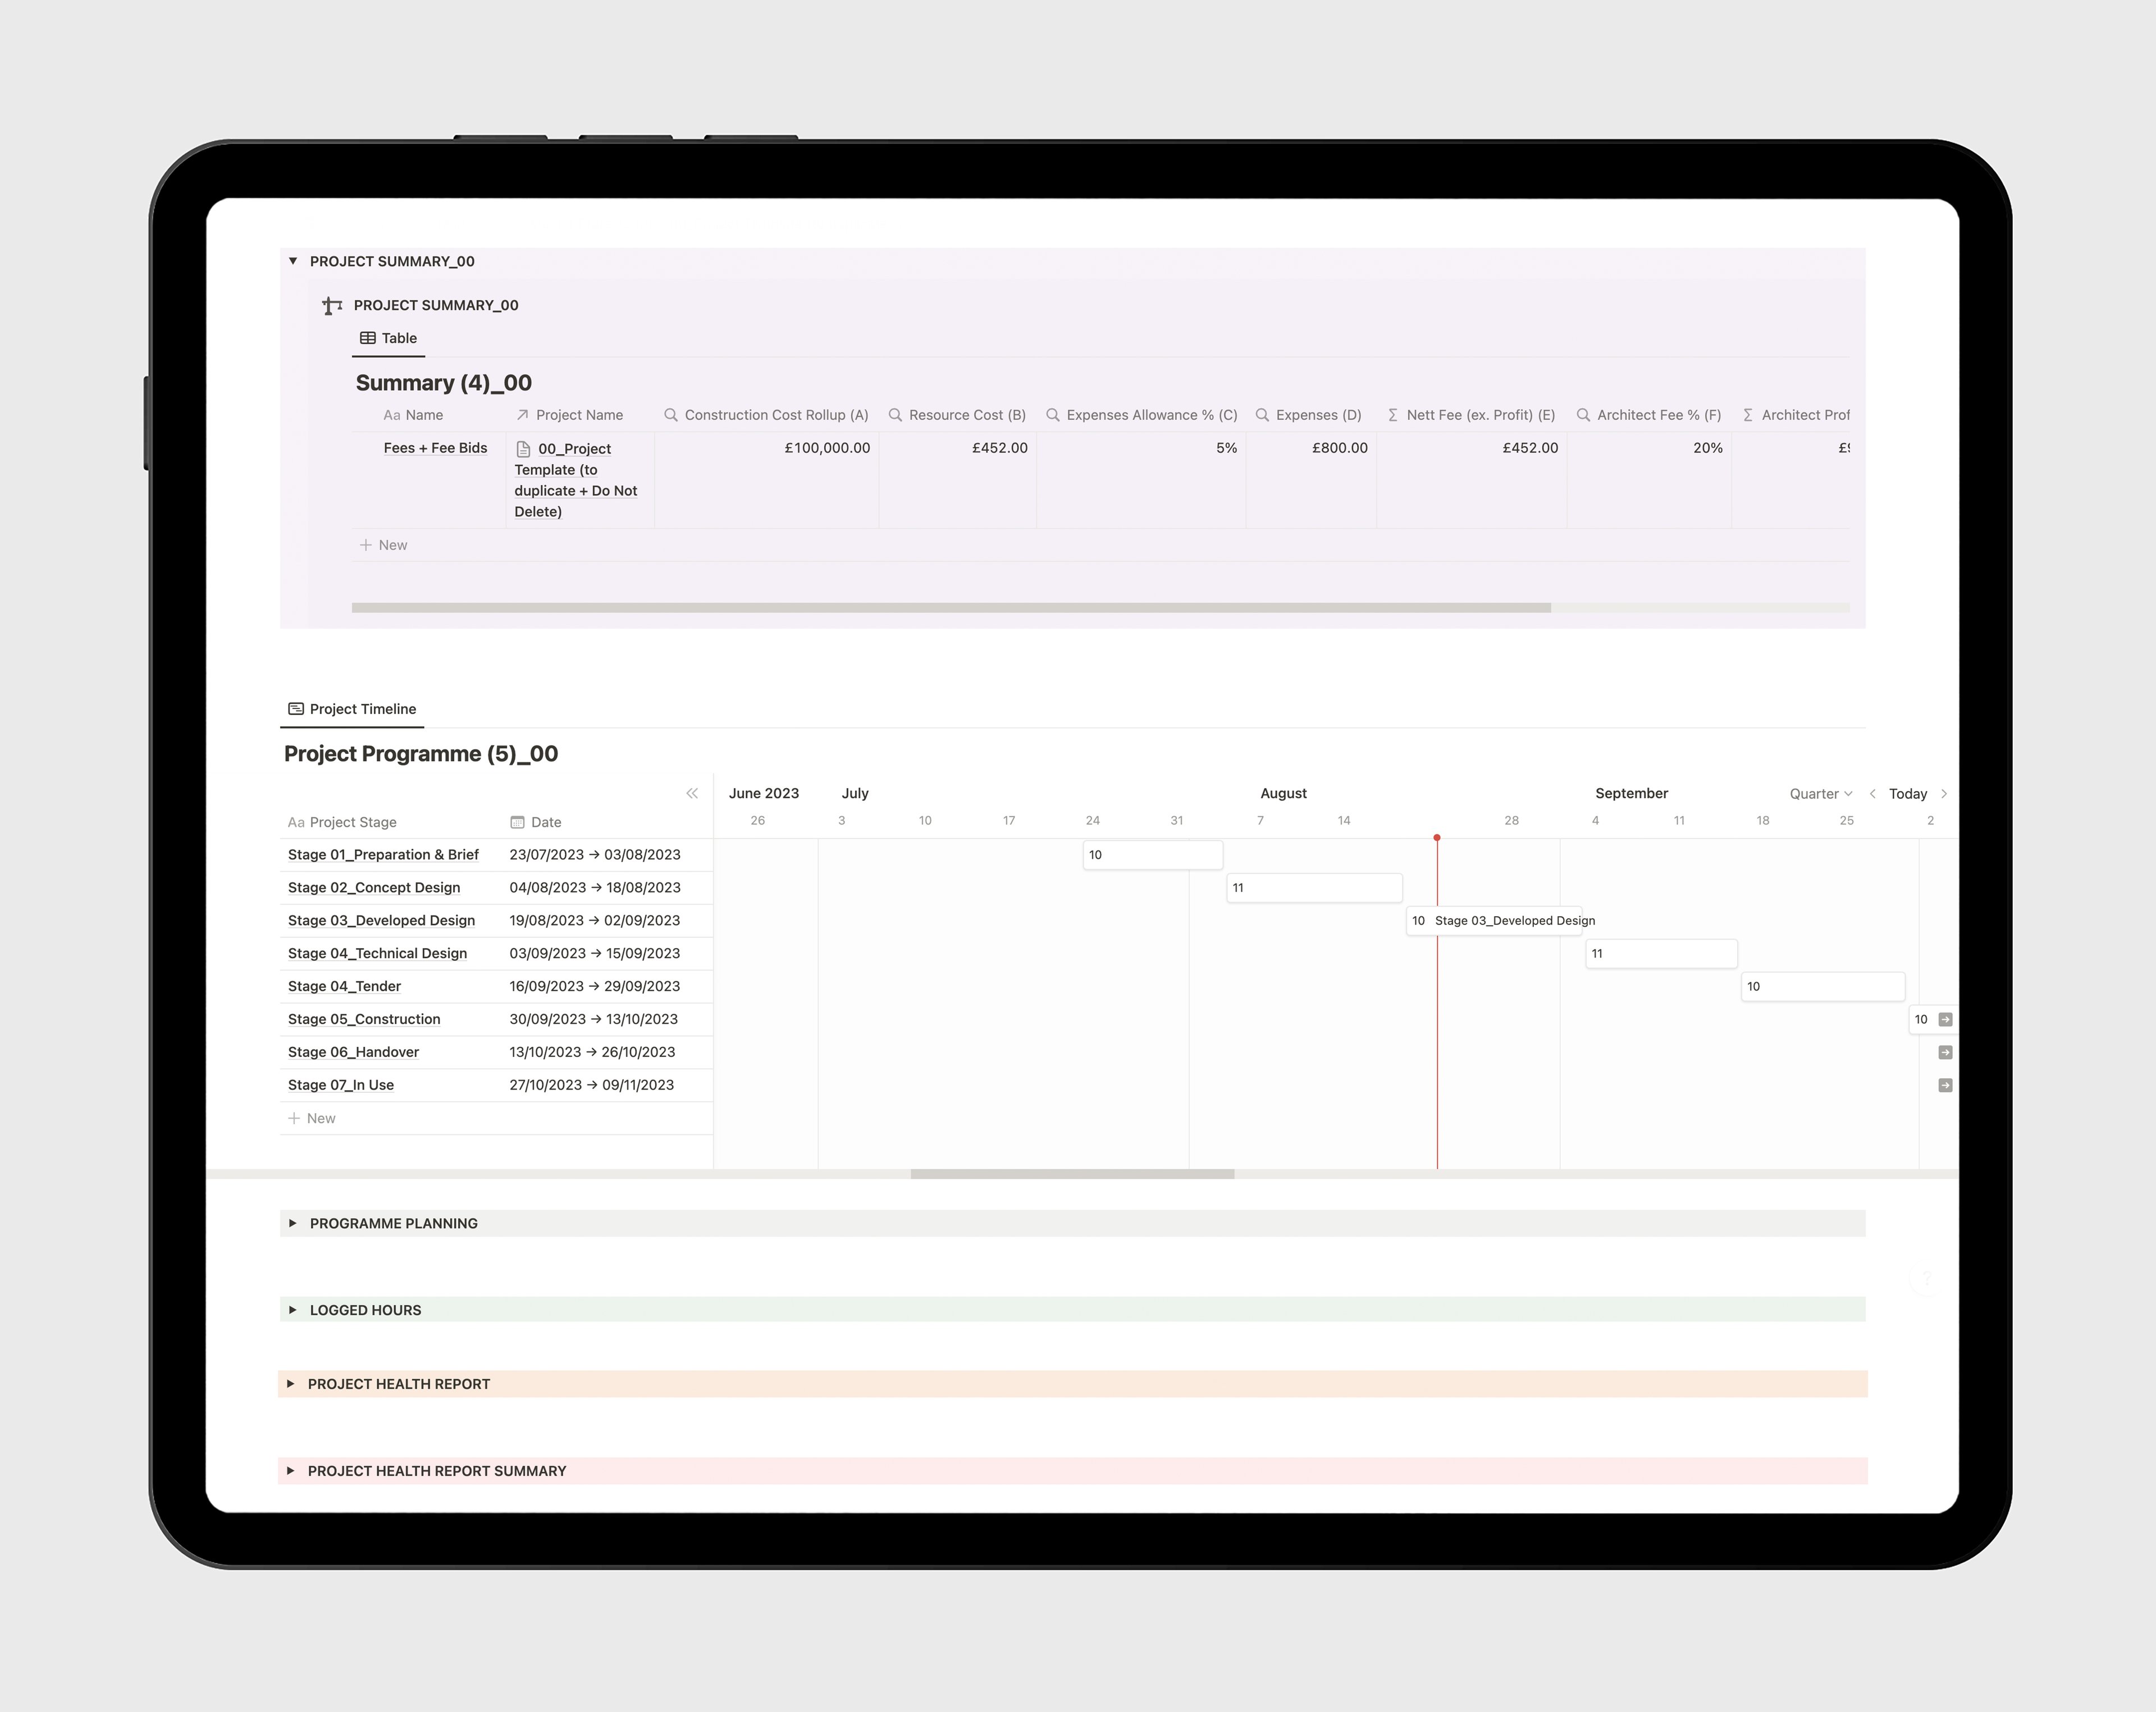 This ULTIMATE template consolidates all complex information into a single source. It's an ideal time-saving tool for architects and teams to accurately plan projects, tasks, and time. Specifically designed for enterprise companies.